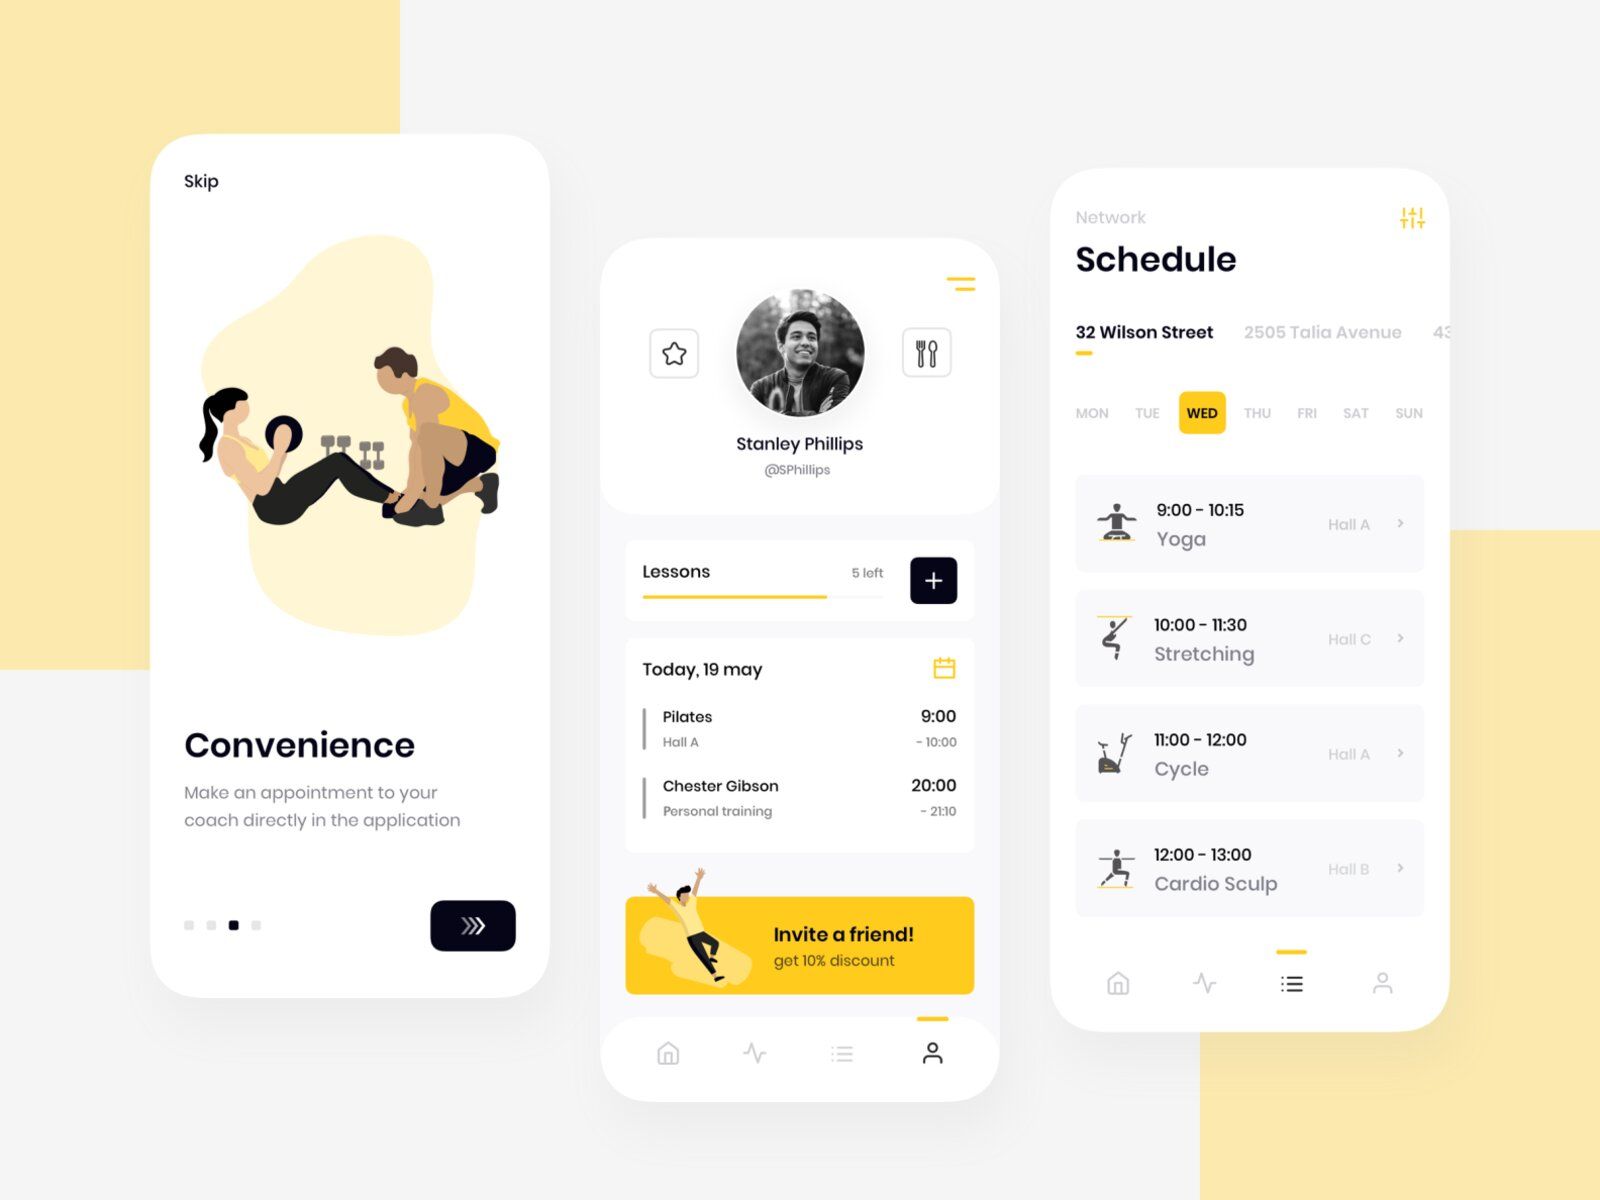 Such apps can improve both the in- and off-studio experience of your members (*image by [Cleveroad](https://dribbble.com/cleveroad){ rel="nofollow" .default-md}*)